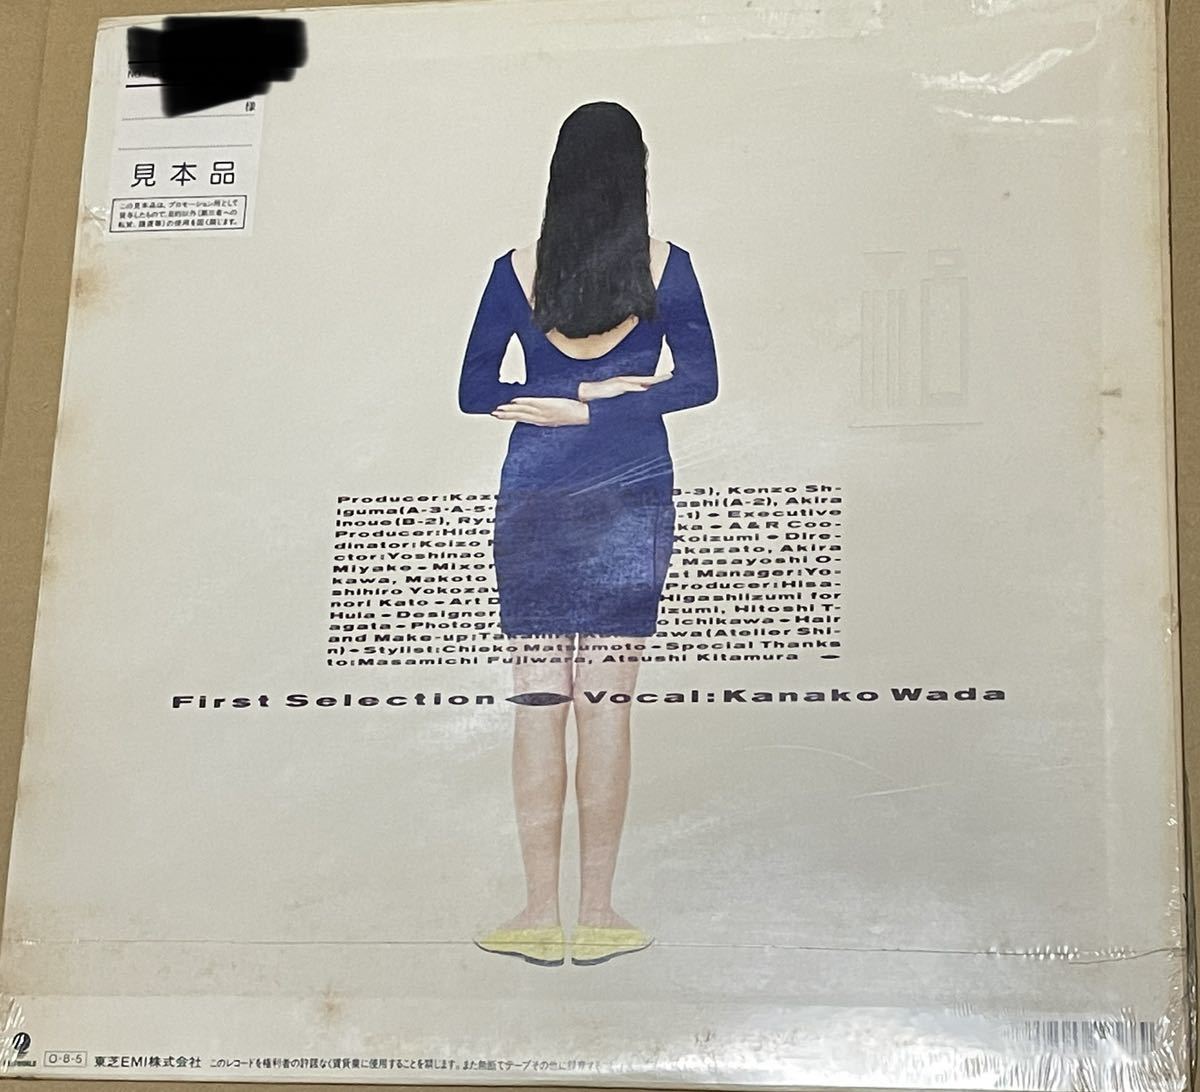  unopened including carriage peace rice field ...-e ski s sample record record / Kanako Wada - Esquisse / WTP90483